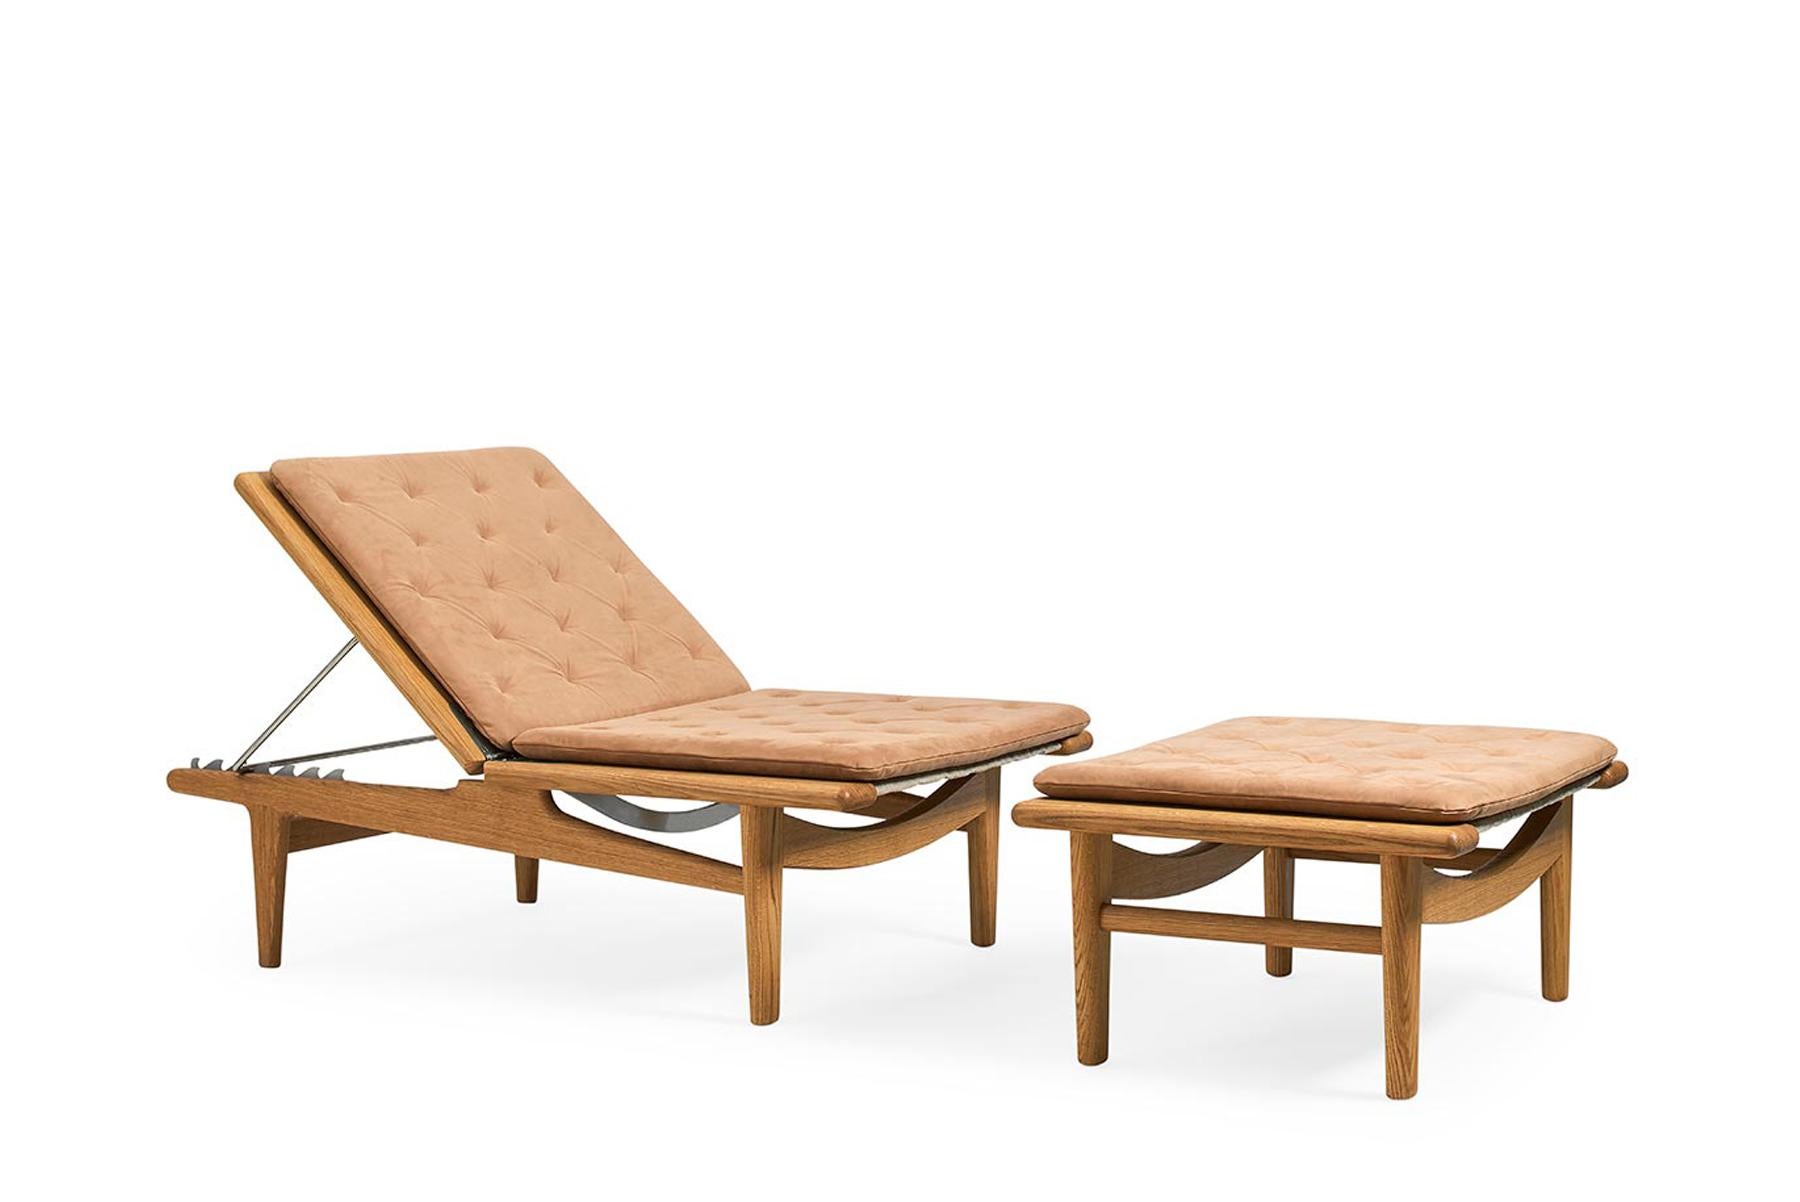 Designed by Hans Wegner in 1954, the GE 1 bench is a versatile piece of furniture. One side adjusts to create a backrest or can be lowered for flat bench seating. Crafted in solid wood, this bench is hand built at GETAMA’s factory in Gedsted,